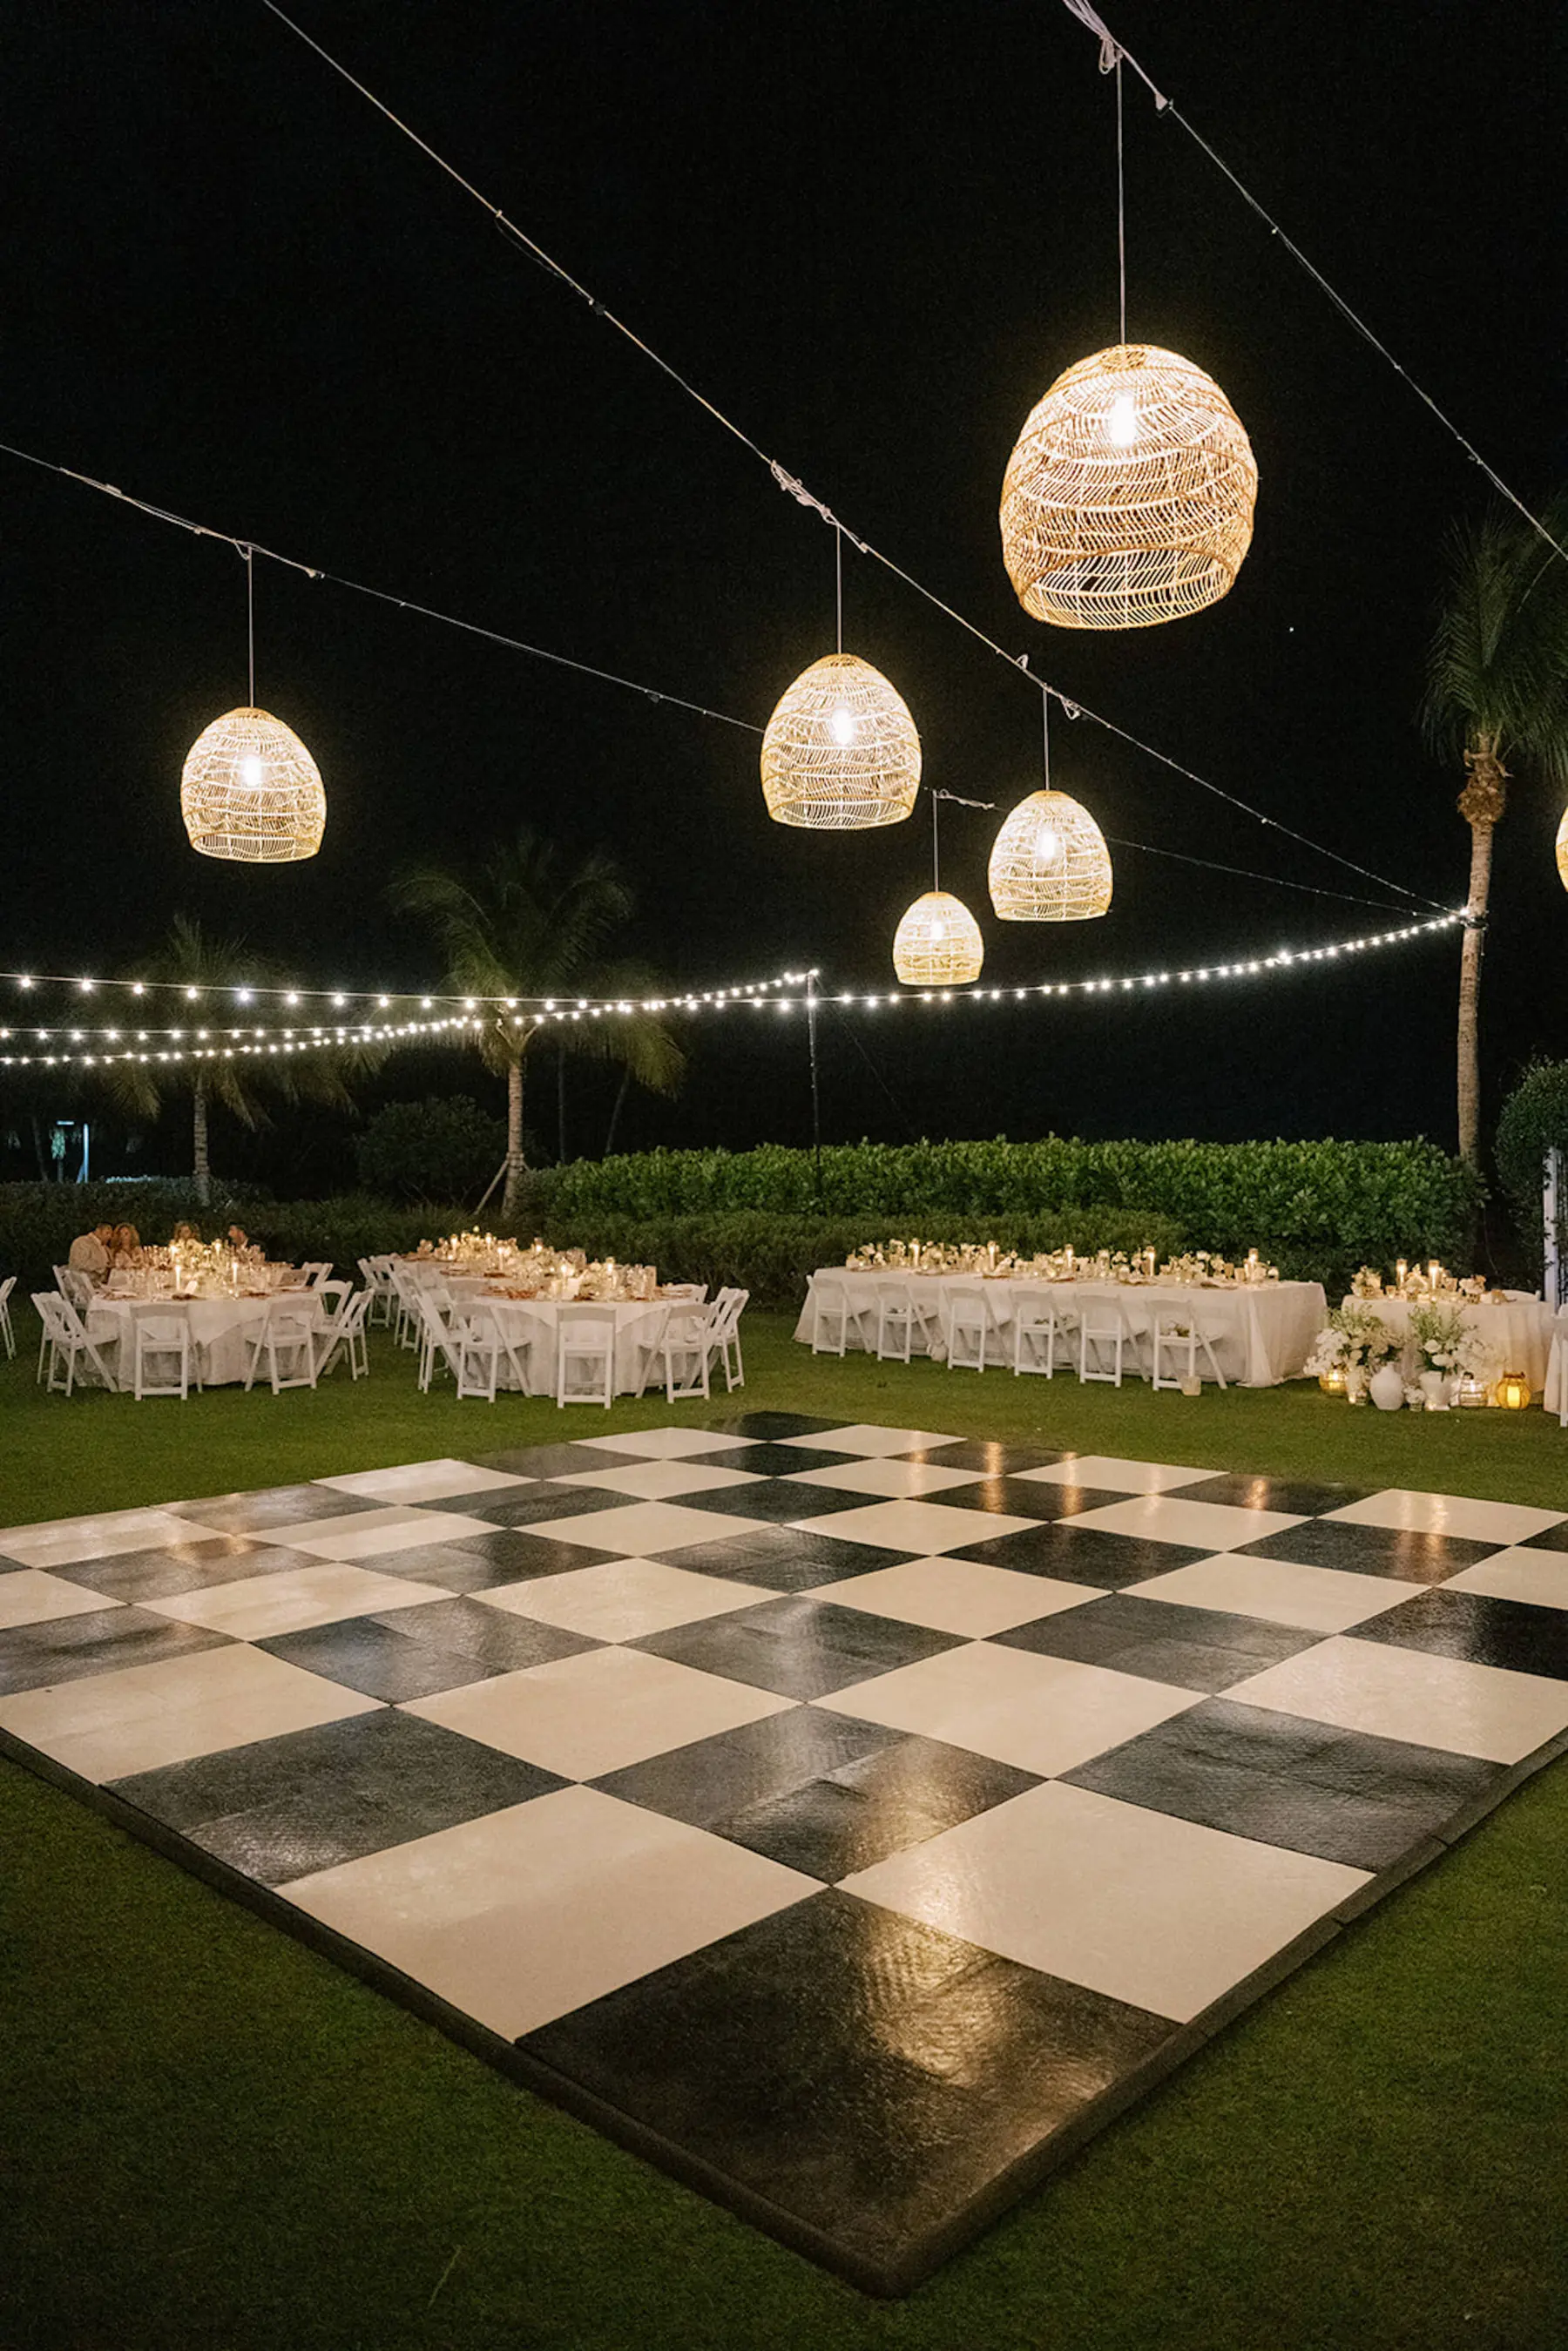 Black and White Checkered Dance Floor | White and Pink Coastal Wedding Reception Inspiration | Sarasota Event Venue The Resort at Longboat Key Club | Planner Elegant Affairs By Design